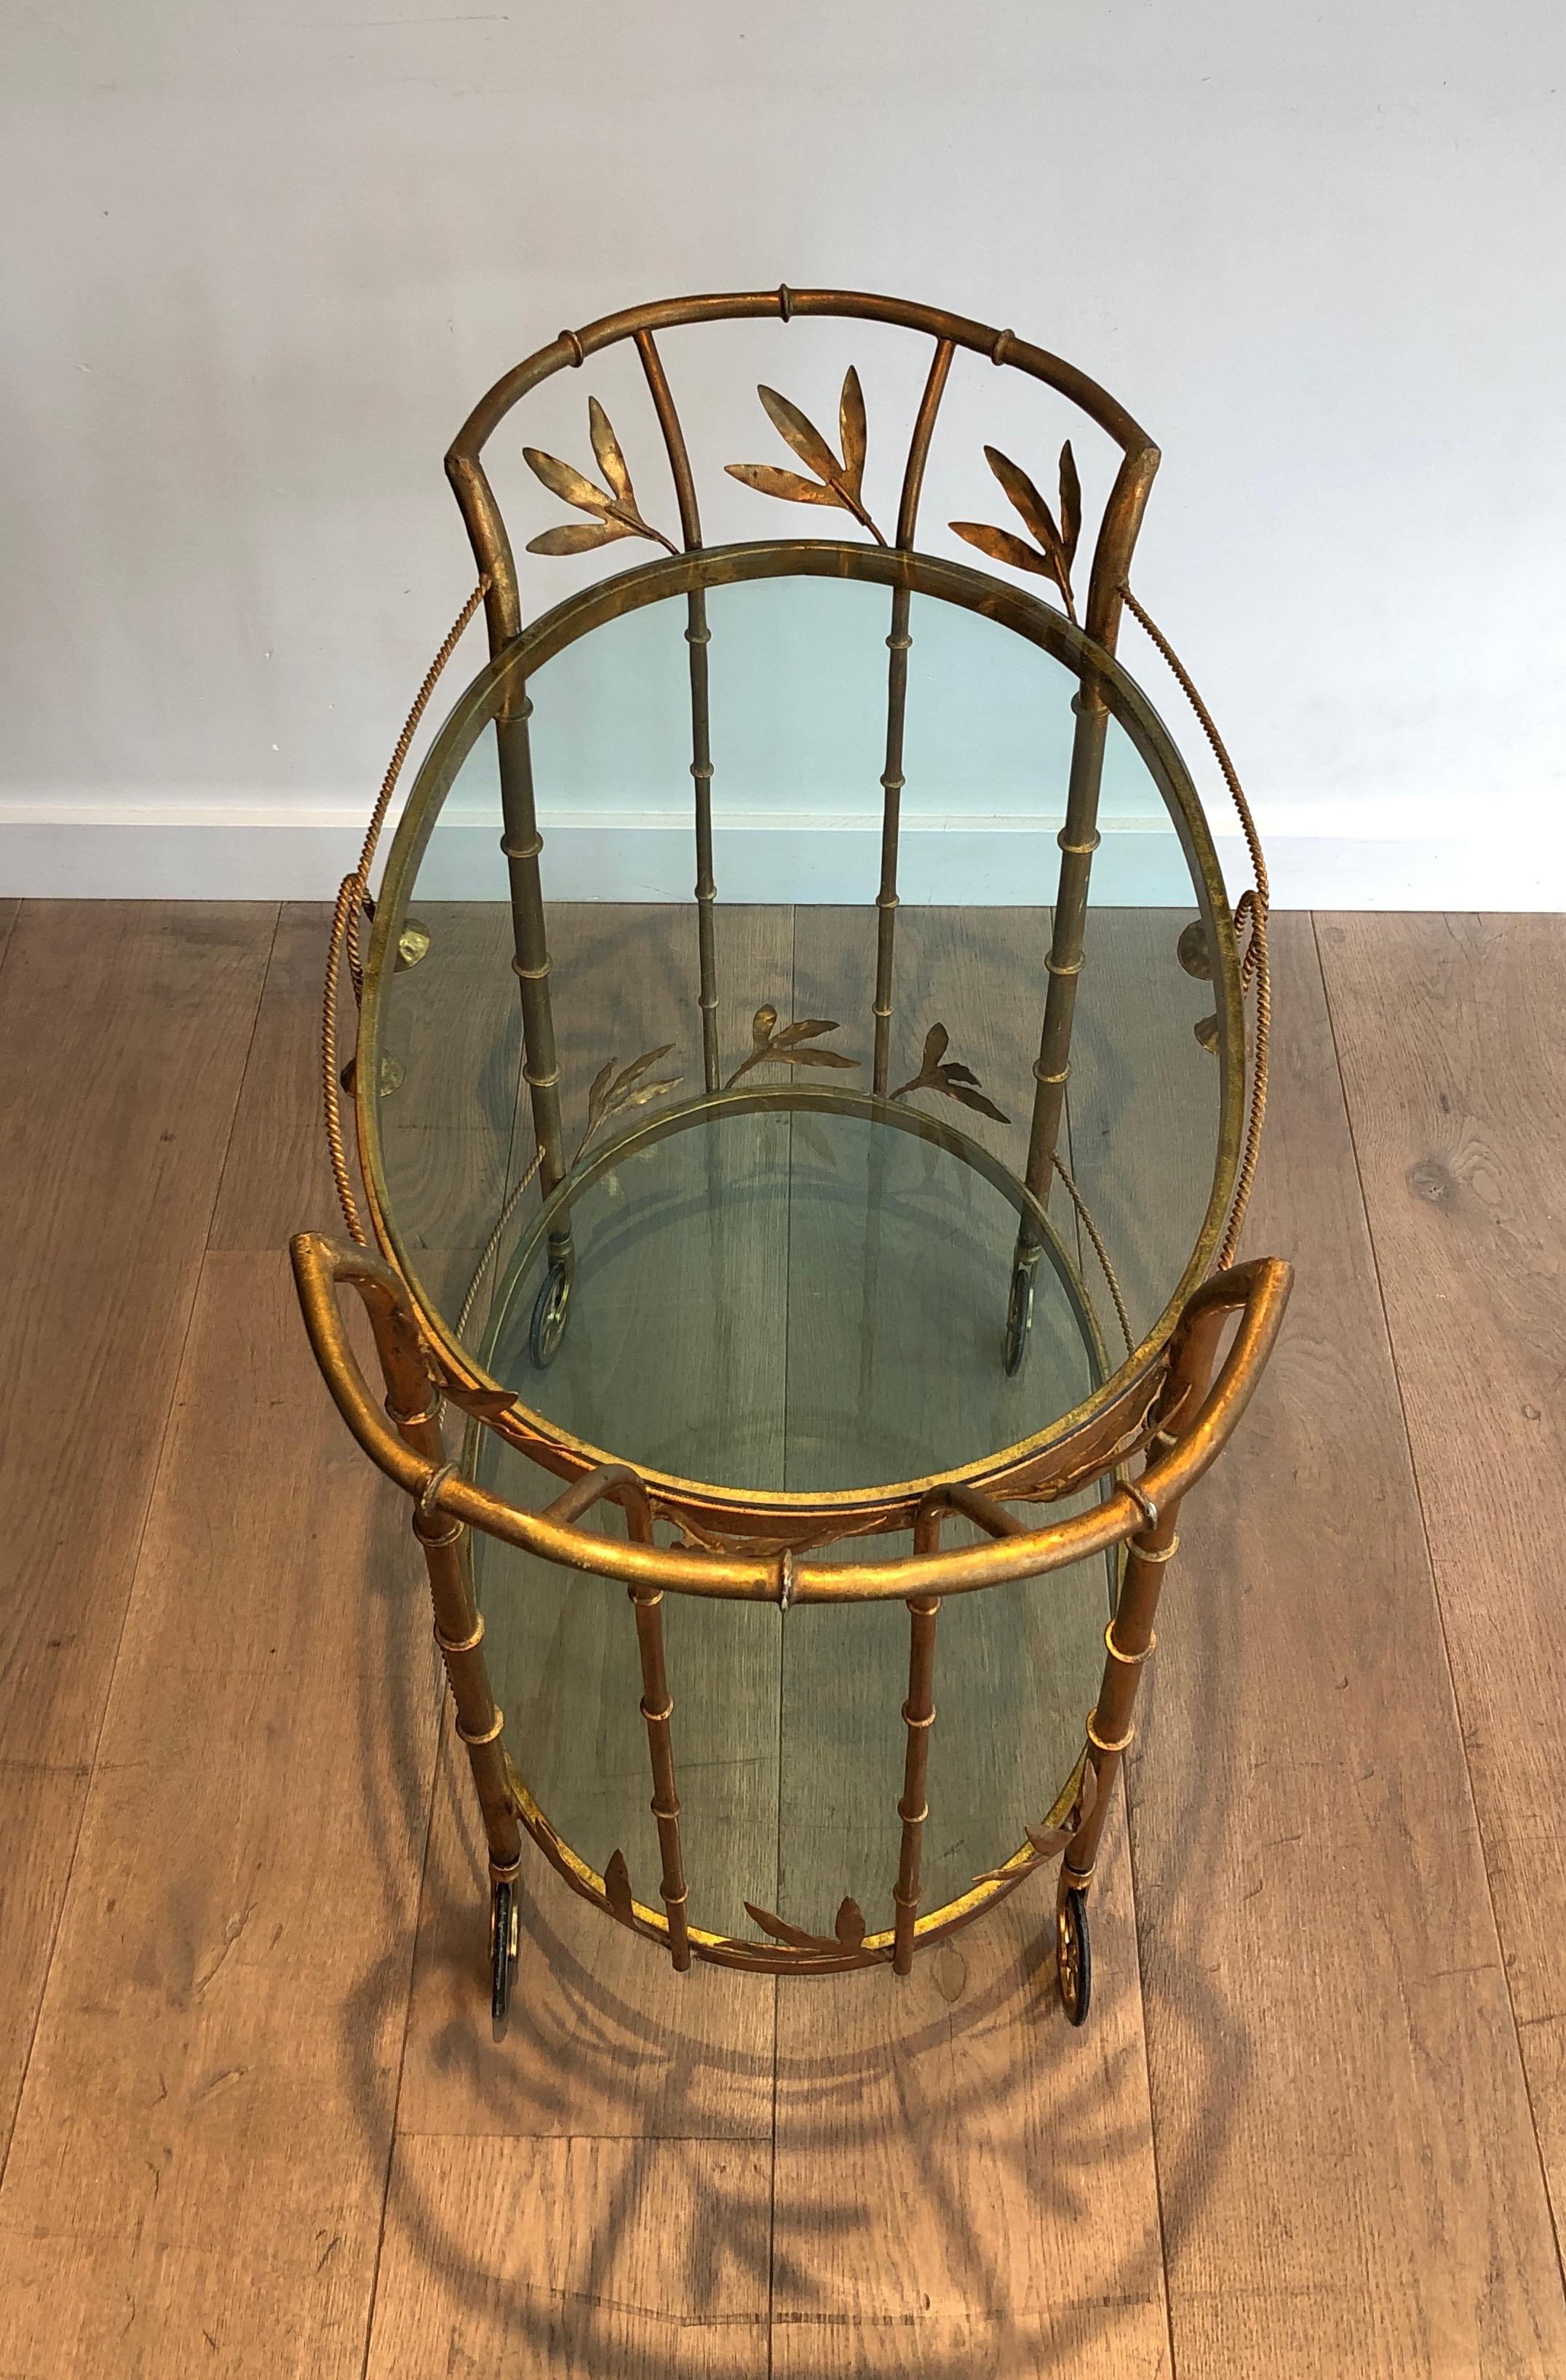 Mid-Century Modern Faux-Bamboo Gilt Metal Drinks Trolley. French work Attributed to Coco Chanel. 